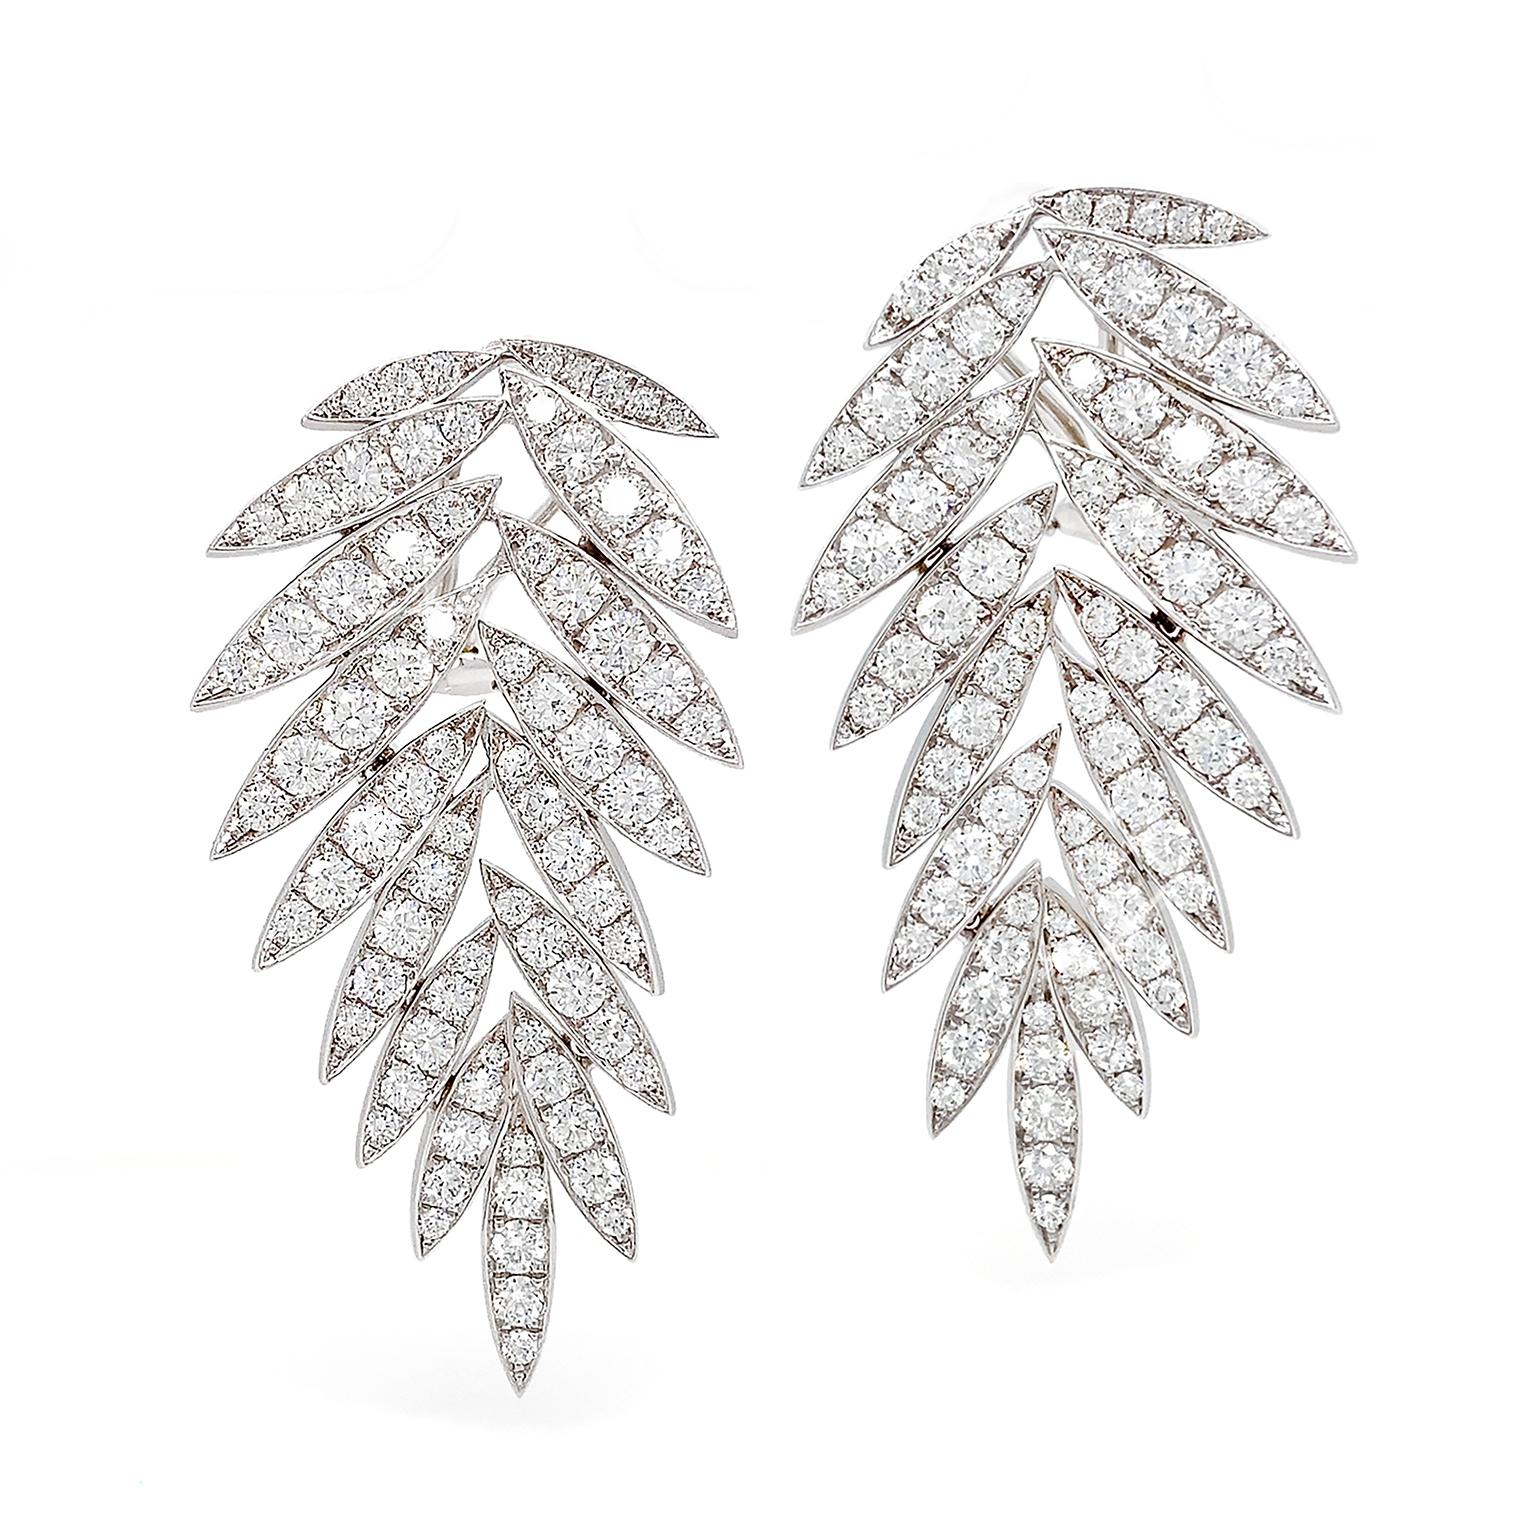 These diamond drop earrings feature round brilliant cuts in leaf shaped 18k white gold settings that fan out. The earrings fasten with clip-backs and measure 0.97 inches (width) by 1.92 inches (length) by 0.15 inches (depth).